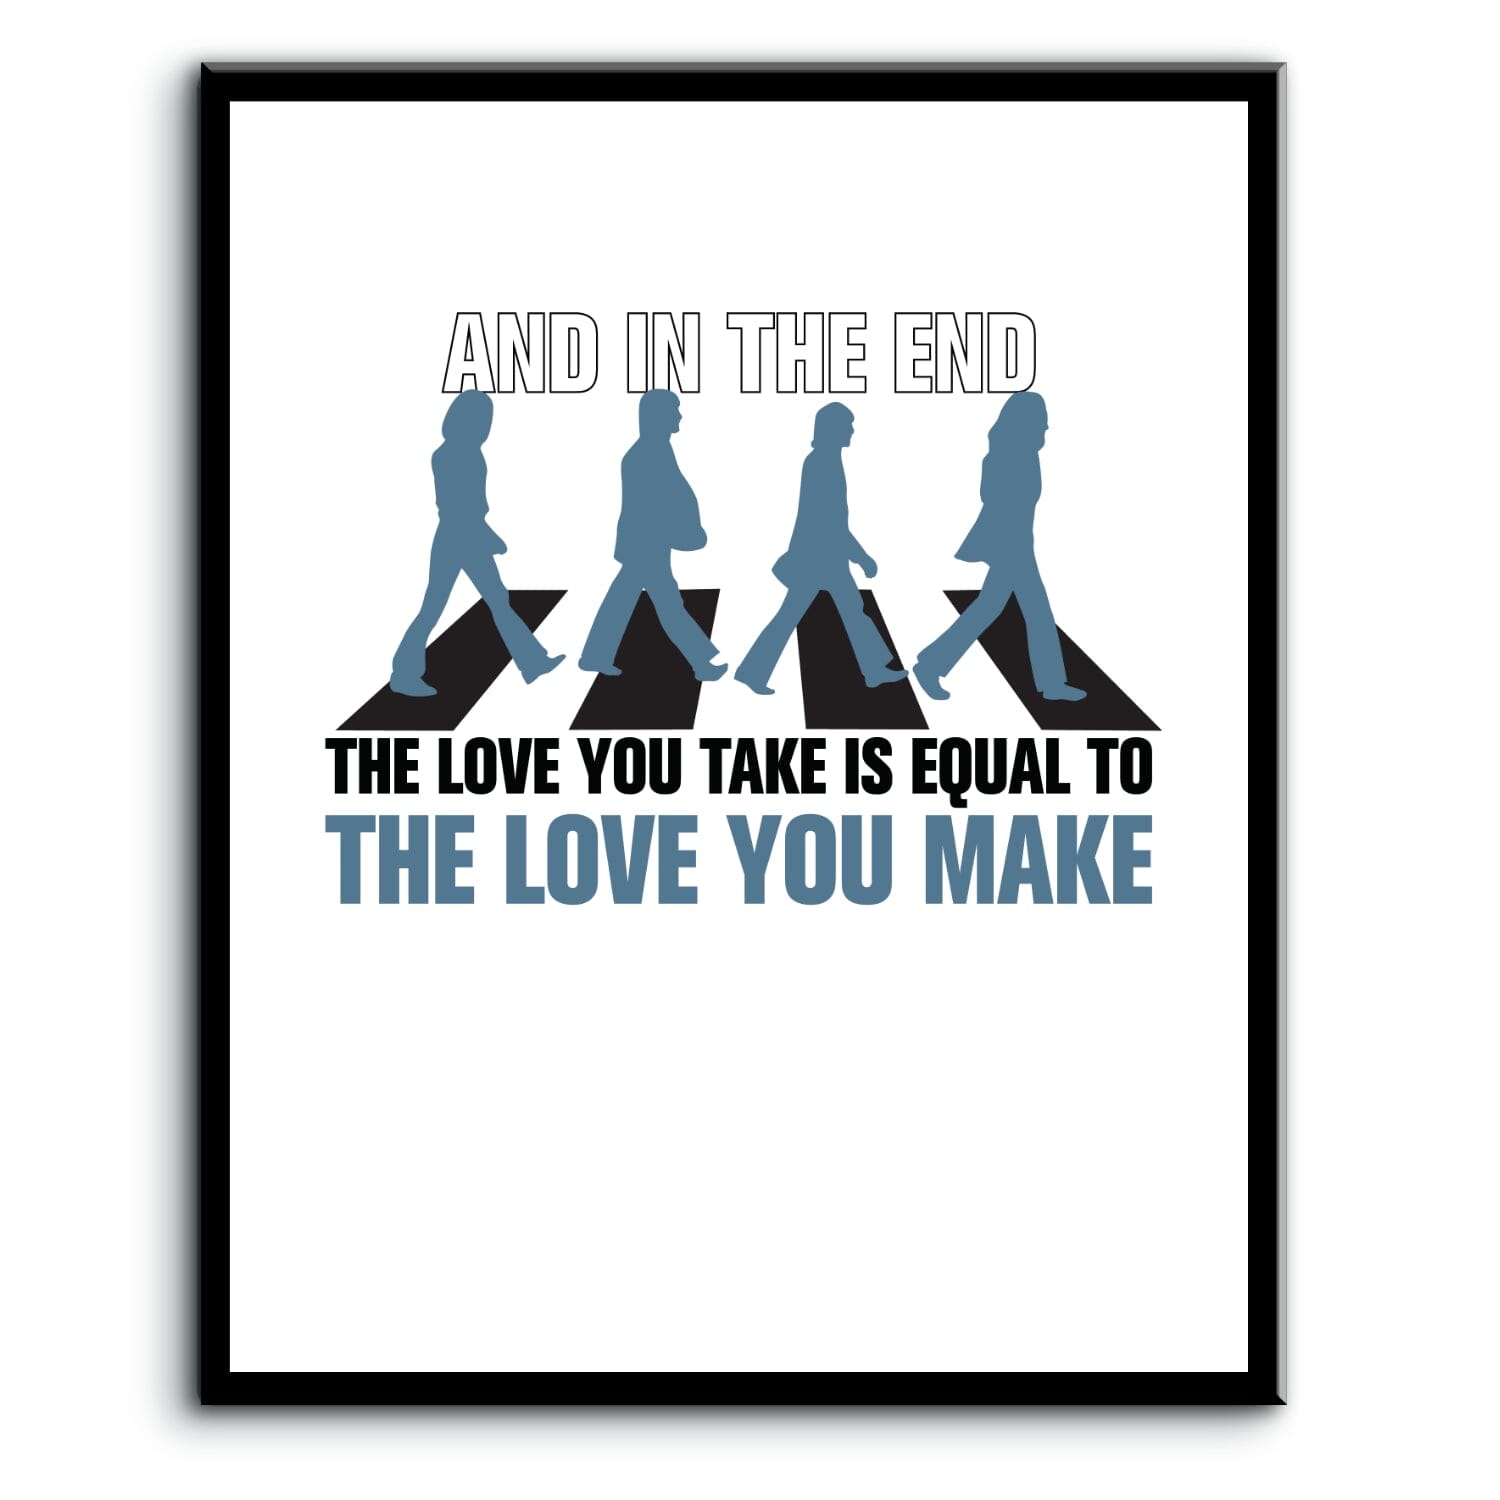 The End by the Beatles - Song Lyric Music Poster Art Print Song Lyrics Art Song Lyrics Art 8x10 Plaque Mount 